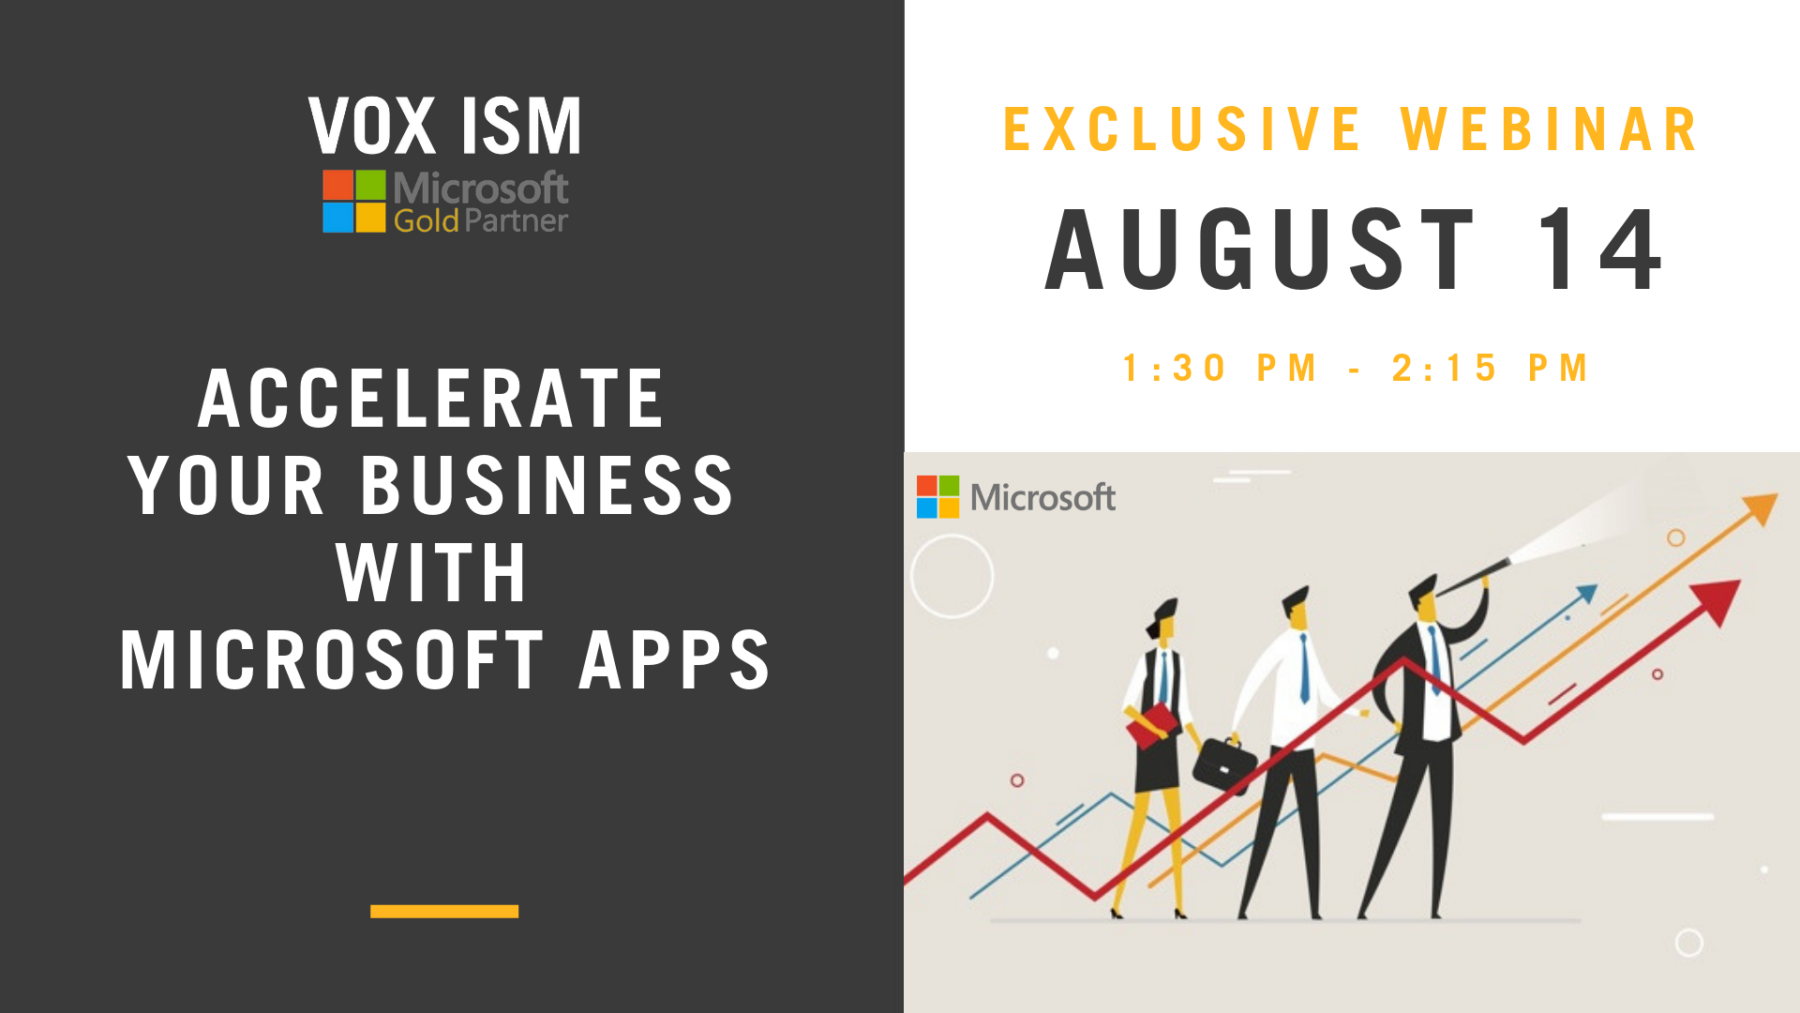 Accelerate Your Business with Microsoft Apps - August 14 - Webinar - VOX ISM